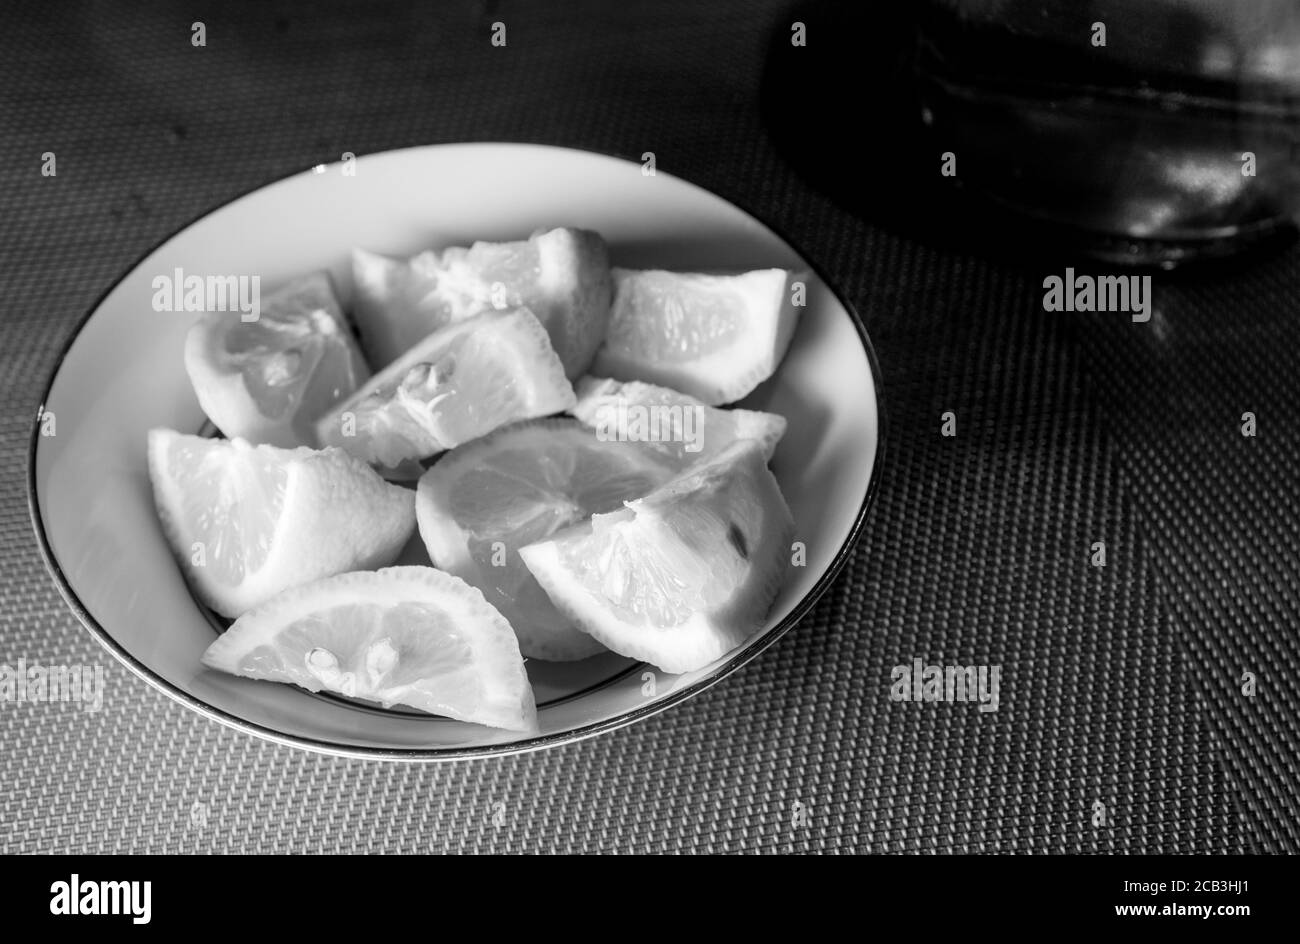 Sliced lemon stacked in a bowl in black and white ready to be served as an accompaniment for a meal. There is moody lighting with contrast. Stock Photo